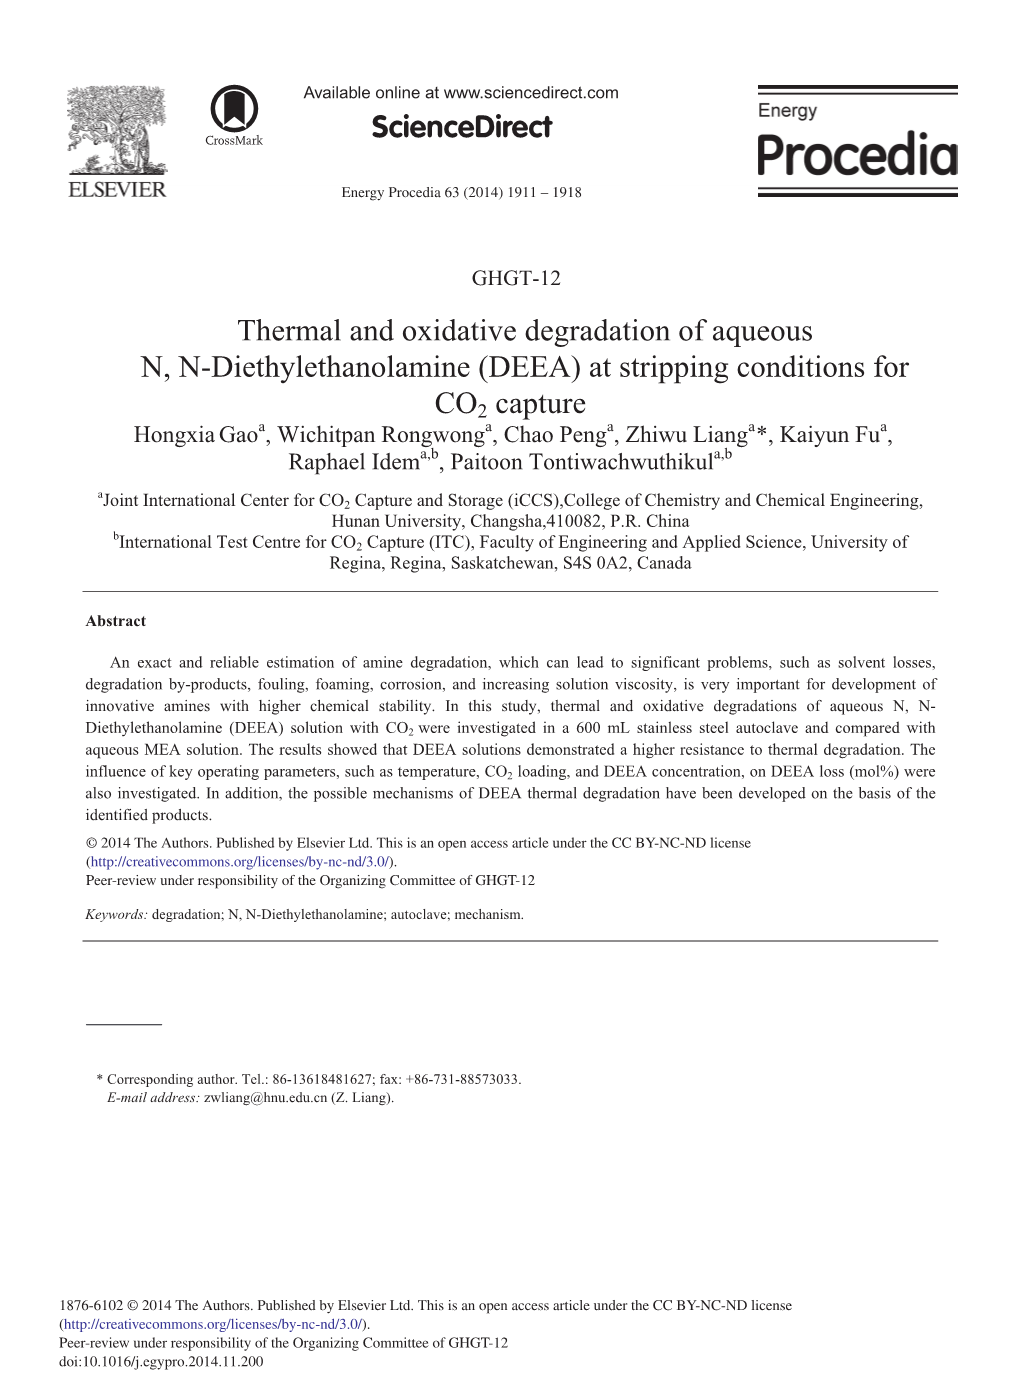 Thermal and Oxidative Degradation of Aqueous N, N-Diethylethanolamine